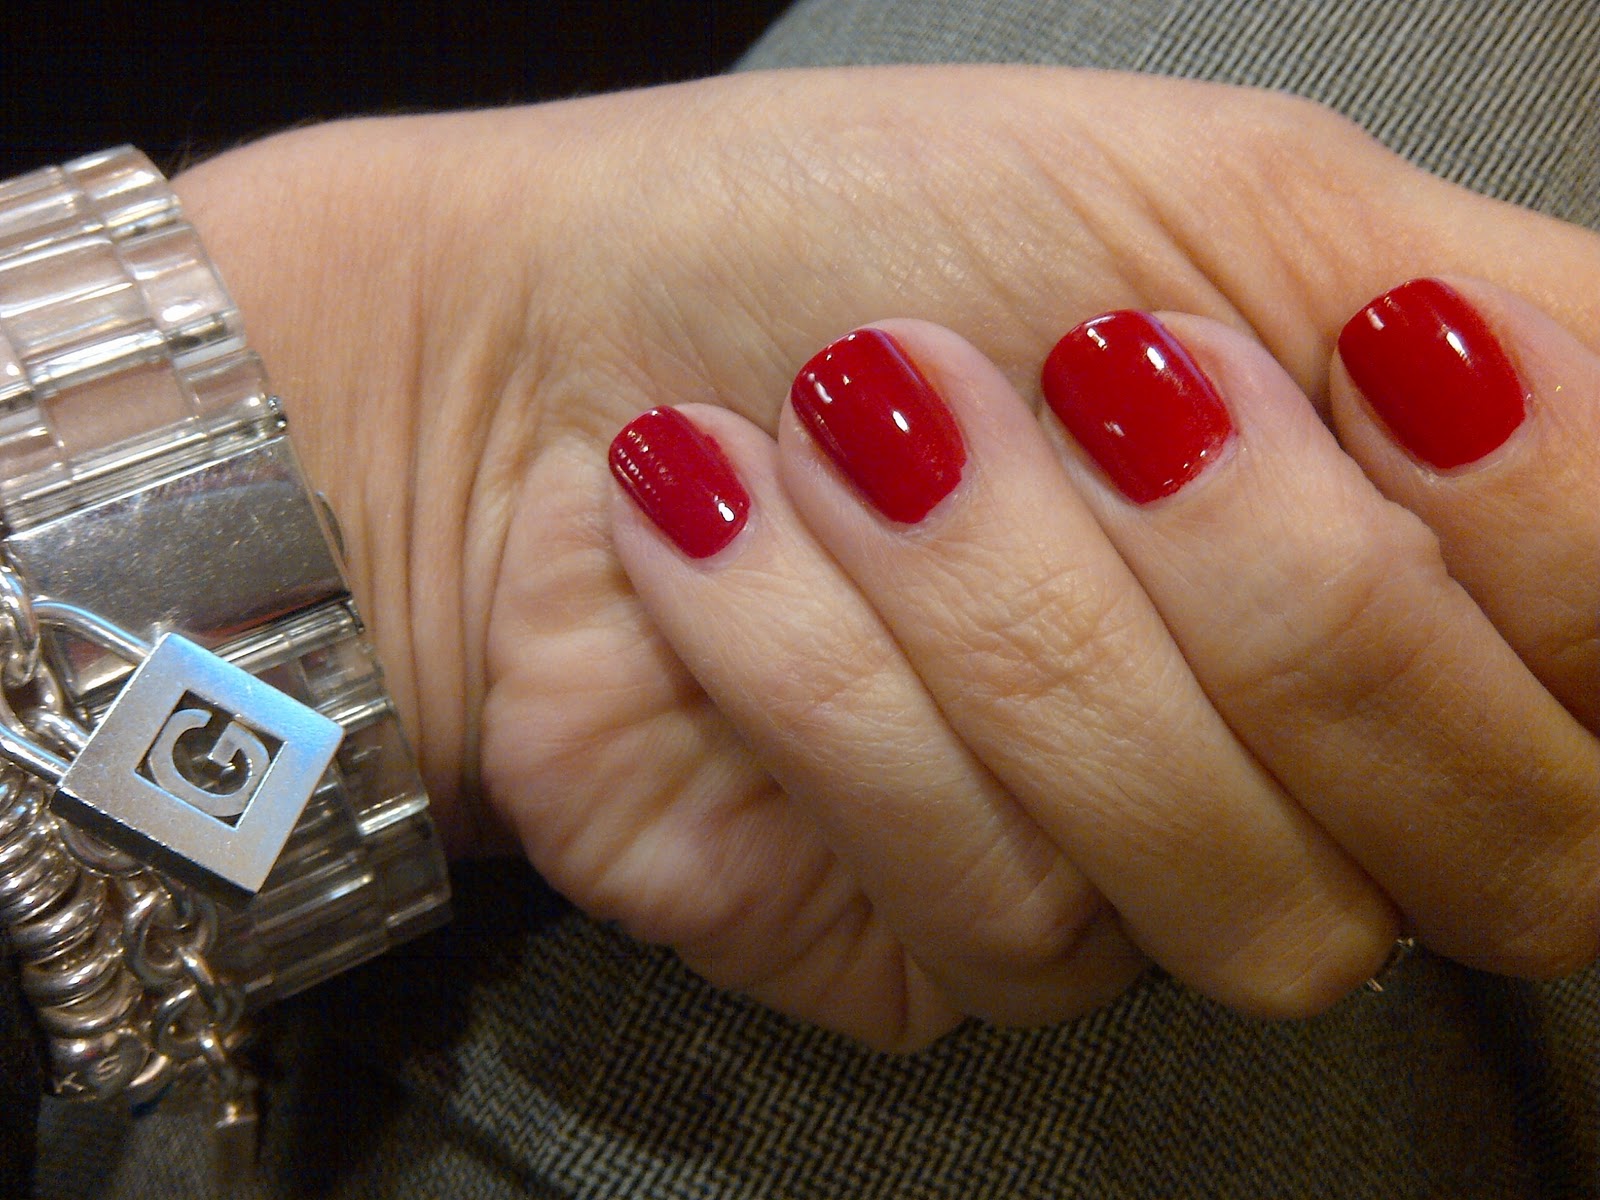 1. OPI Nail Lacquer in "Big Apple Red" - wide 6